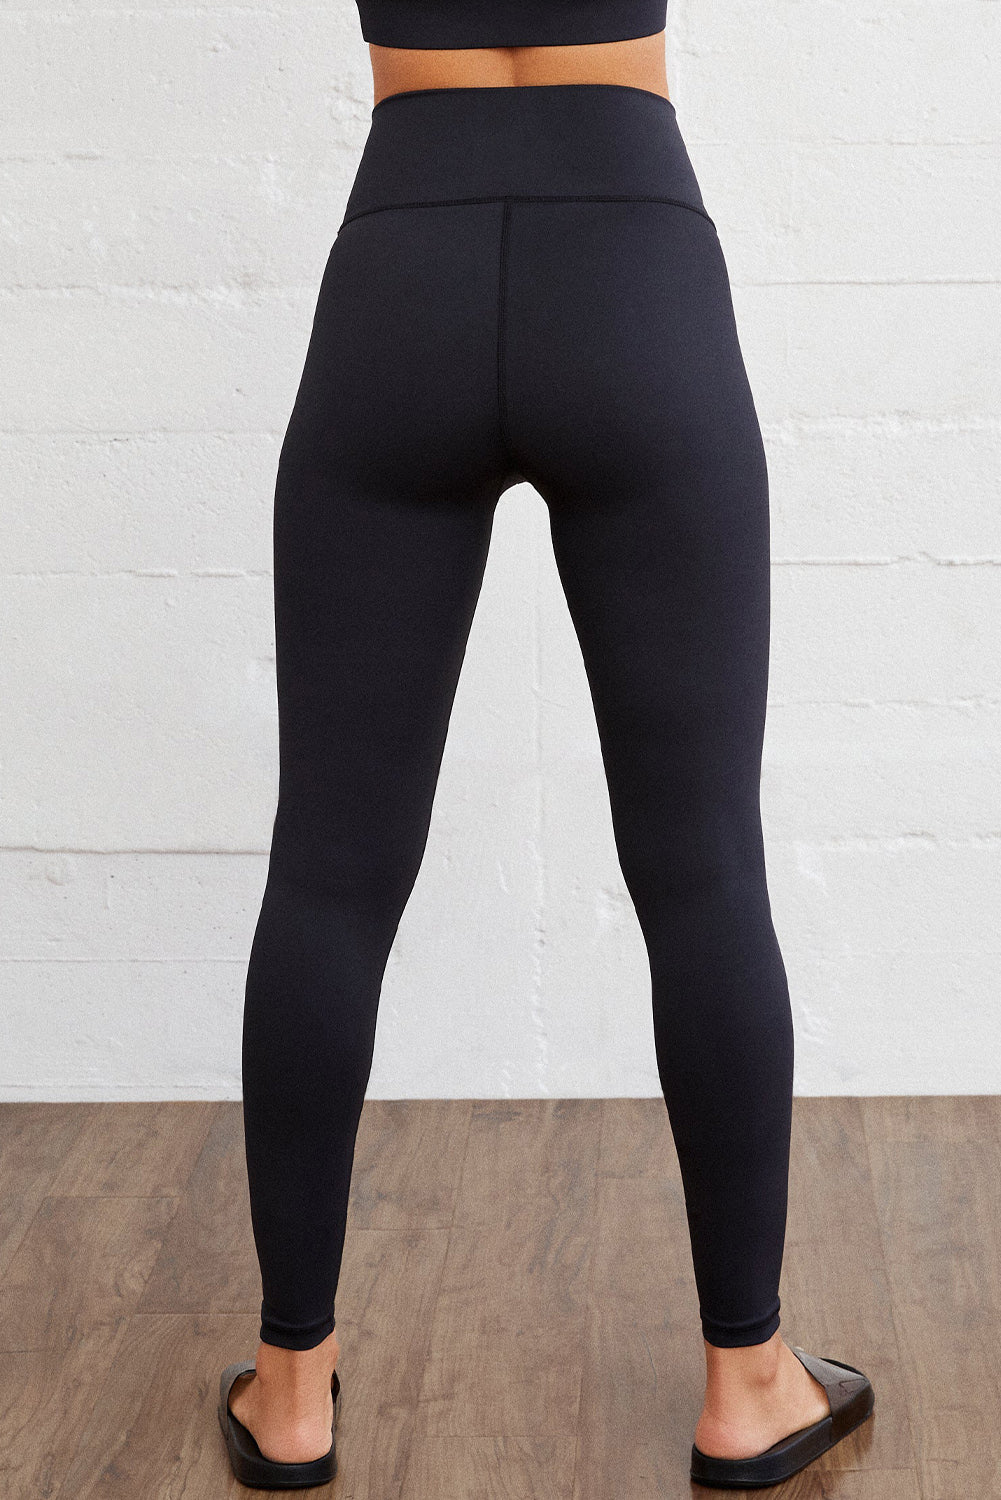 Cali Chic Black Arched Waist Seamless Active Leggings